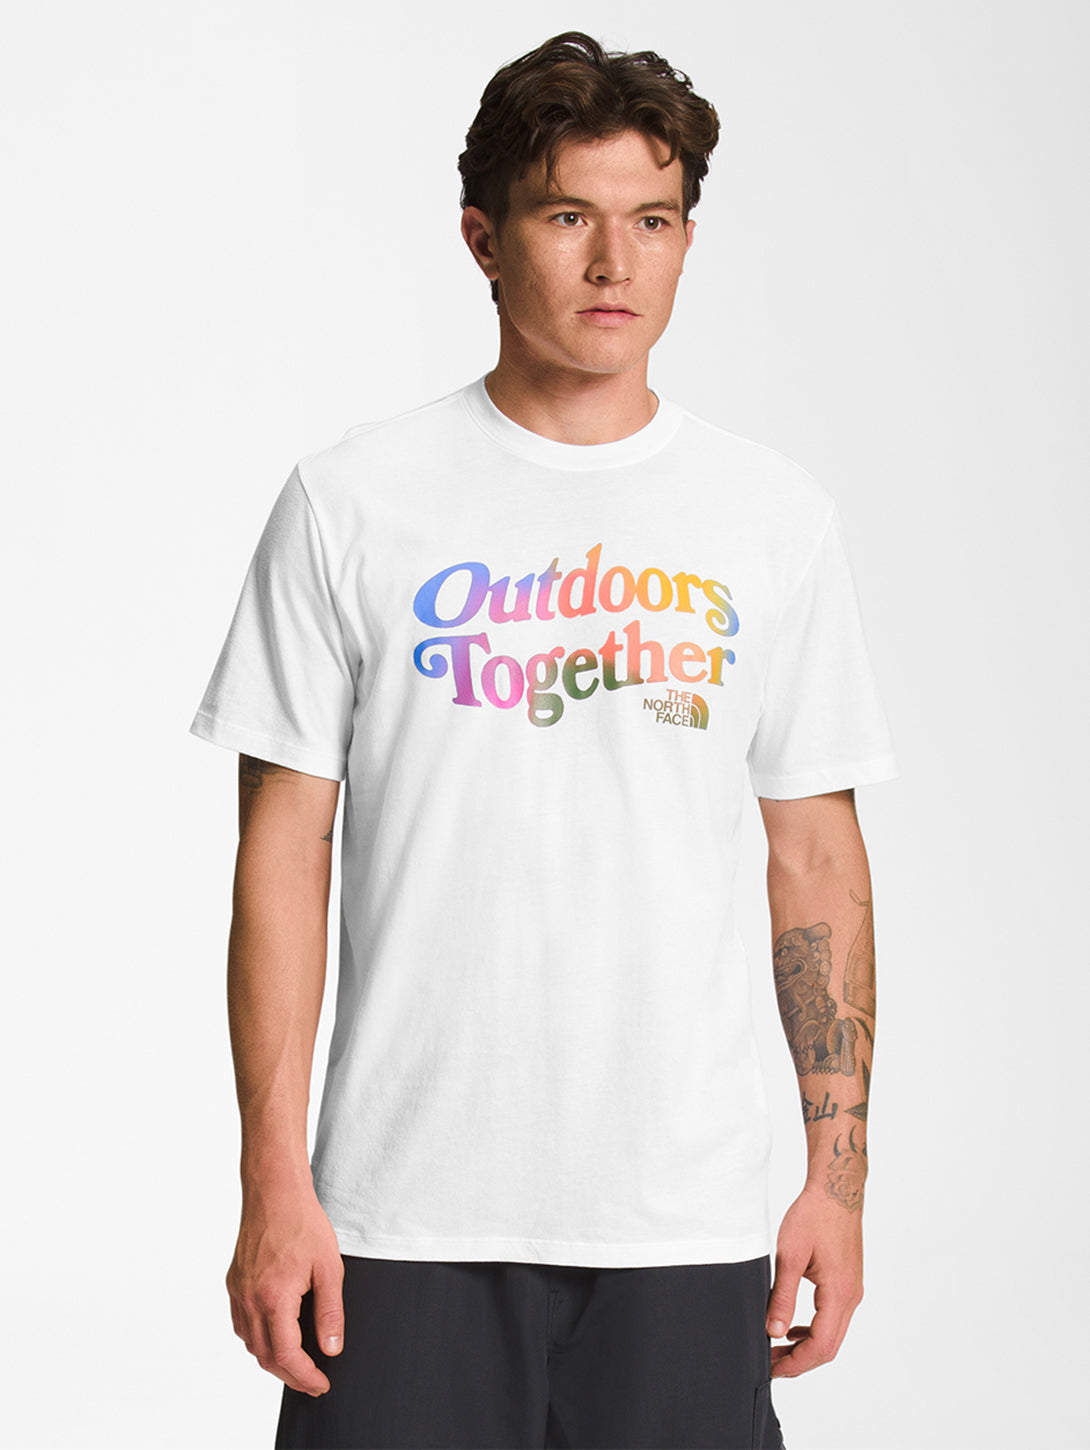 The North Face Men's Pride Outdoors Together T-Shirt White Xs